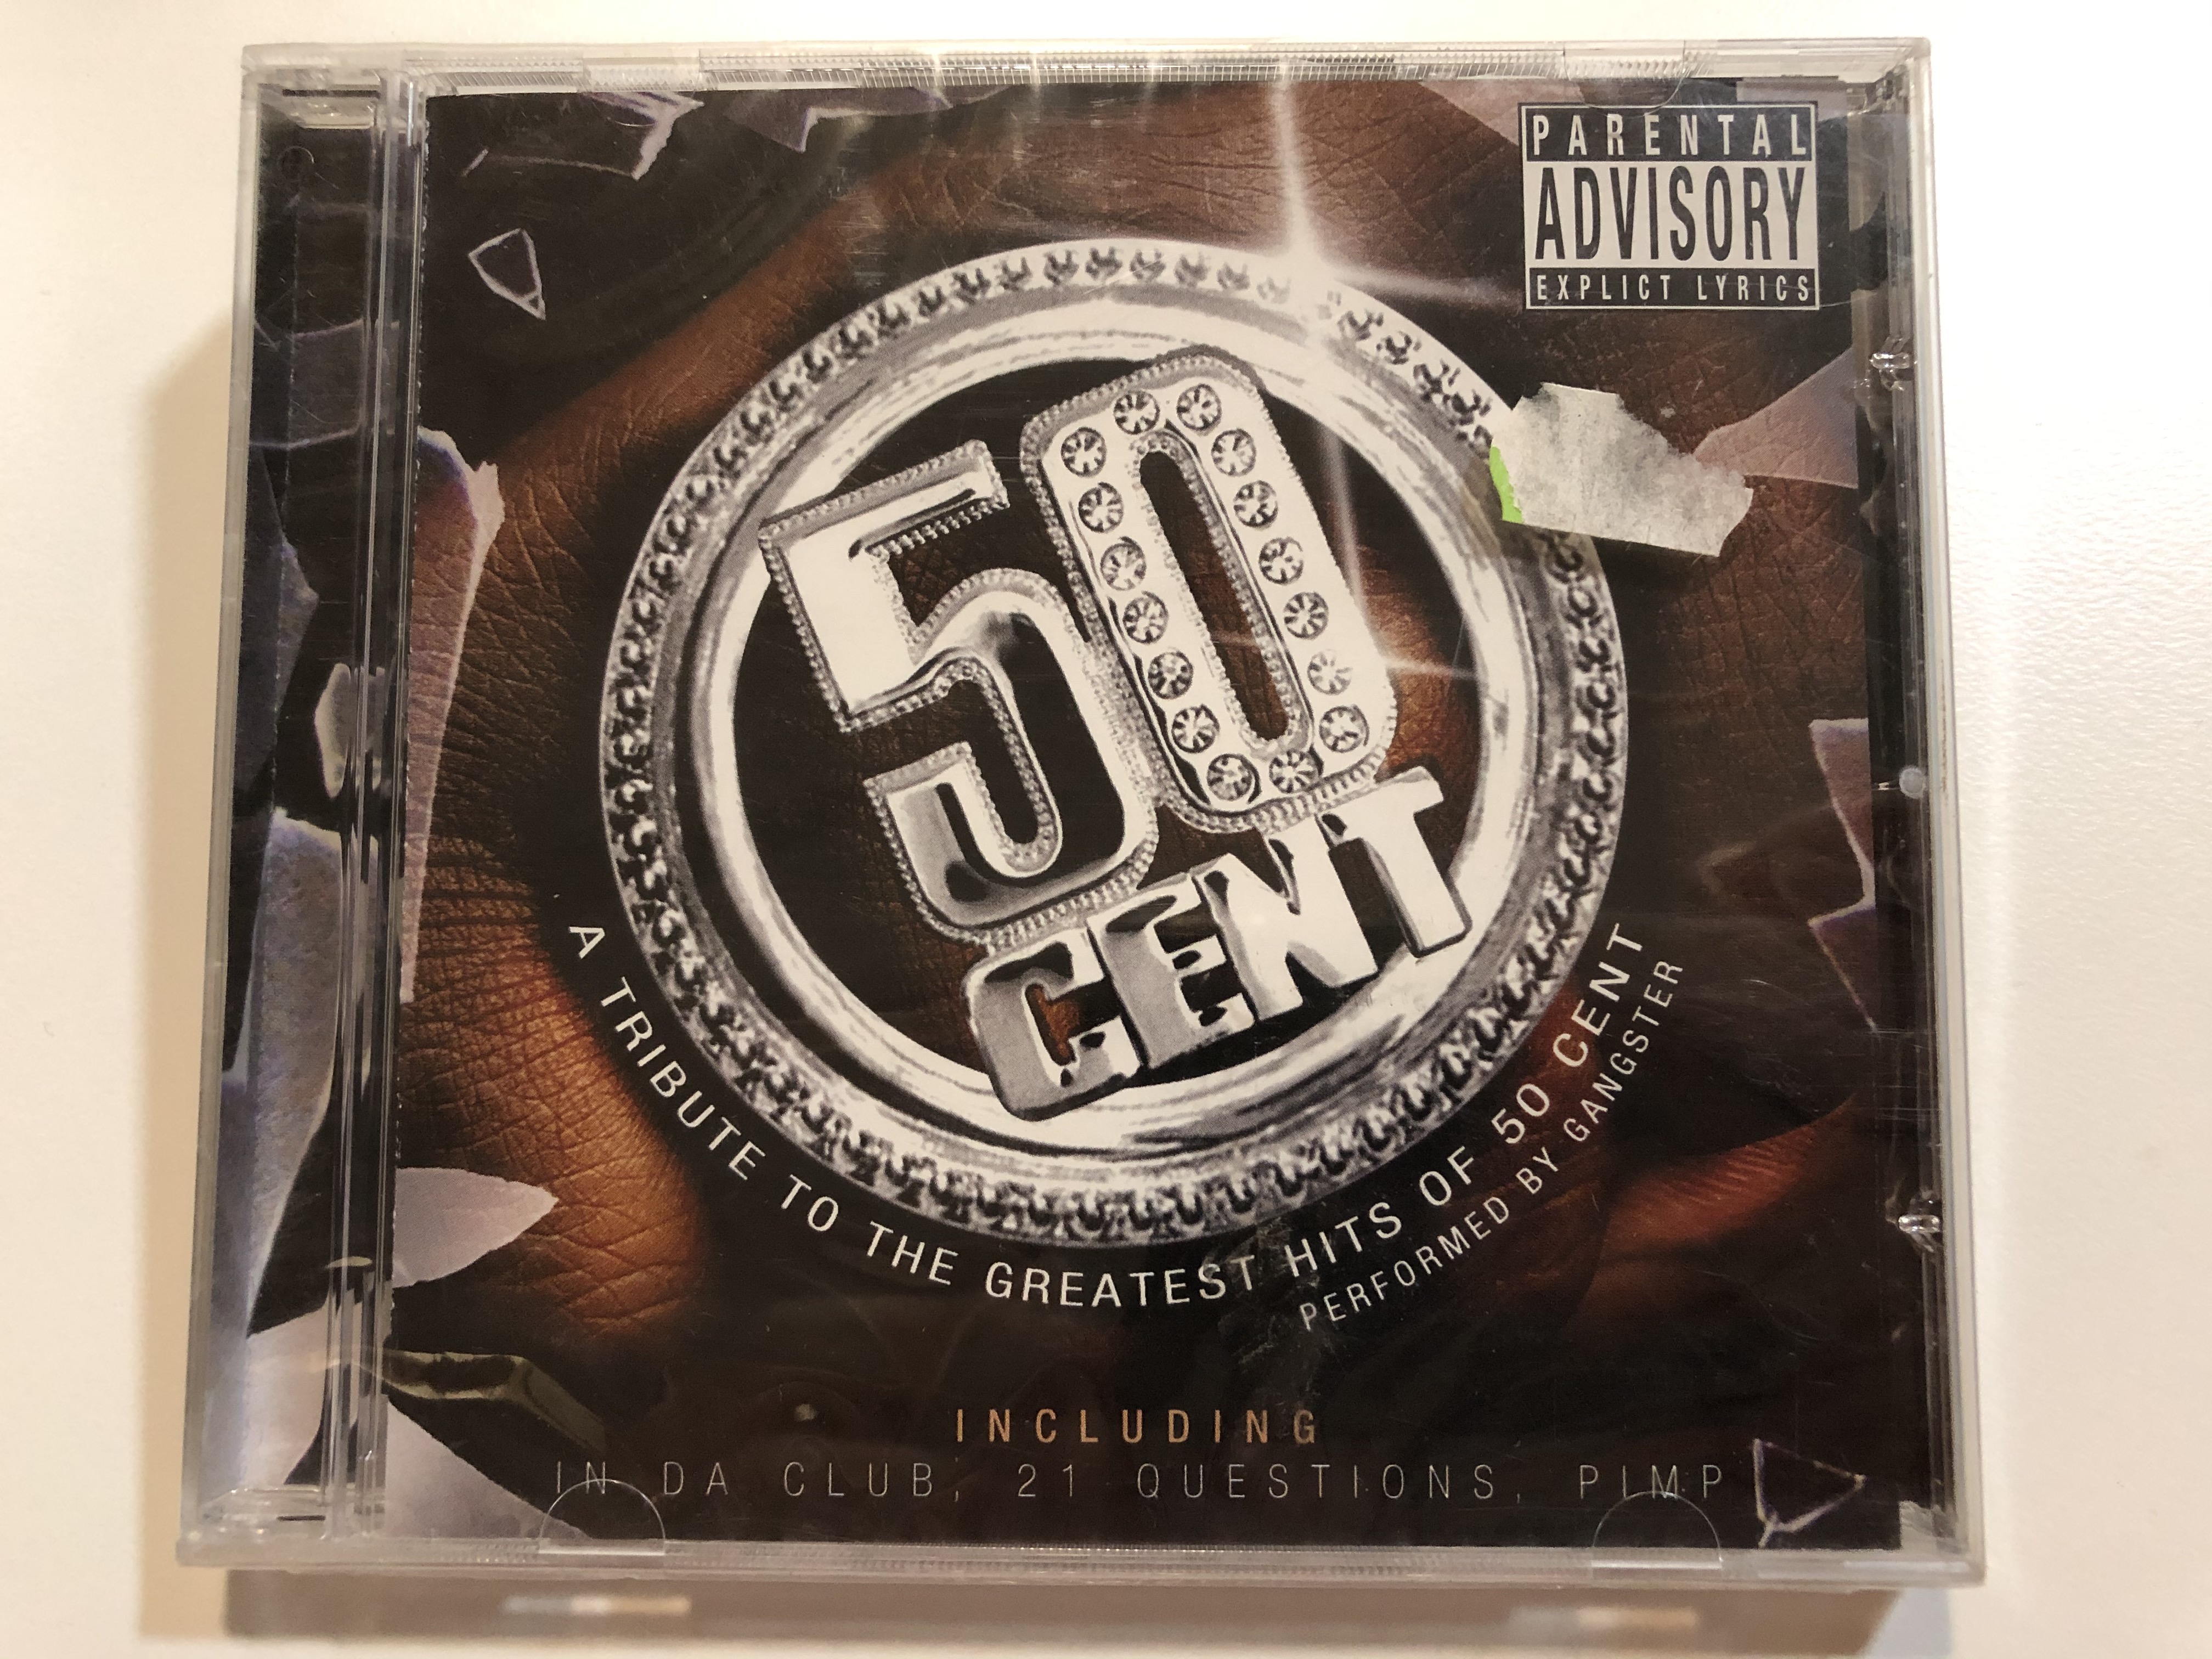 50-cent-a-tribute-to-the-greatest-hits-of-50-cent-performed-by-gangster-including-in-da-club-21-questions-p.i.m.p.-prism-leisure-audio-cd-2003-platcv-8333-1-.jpg